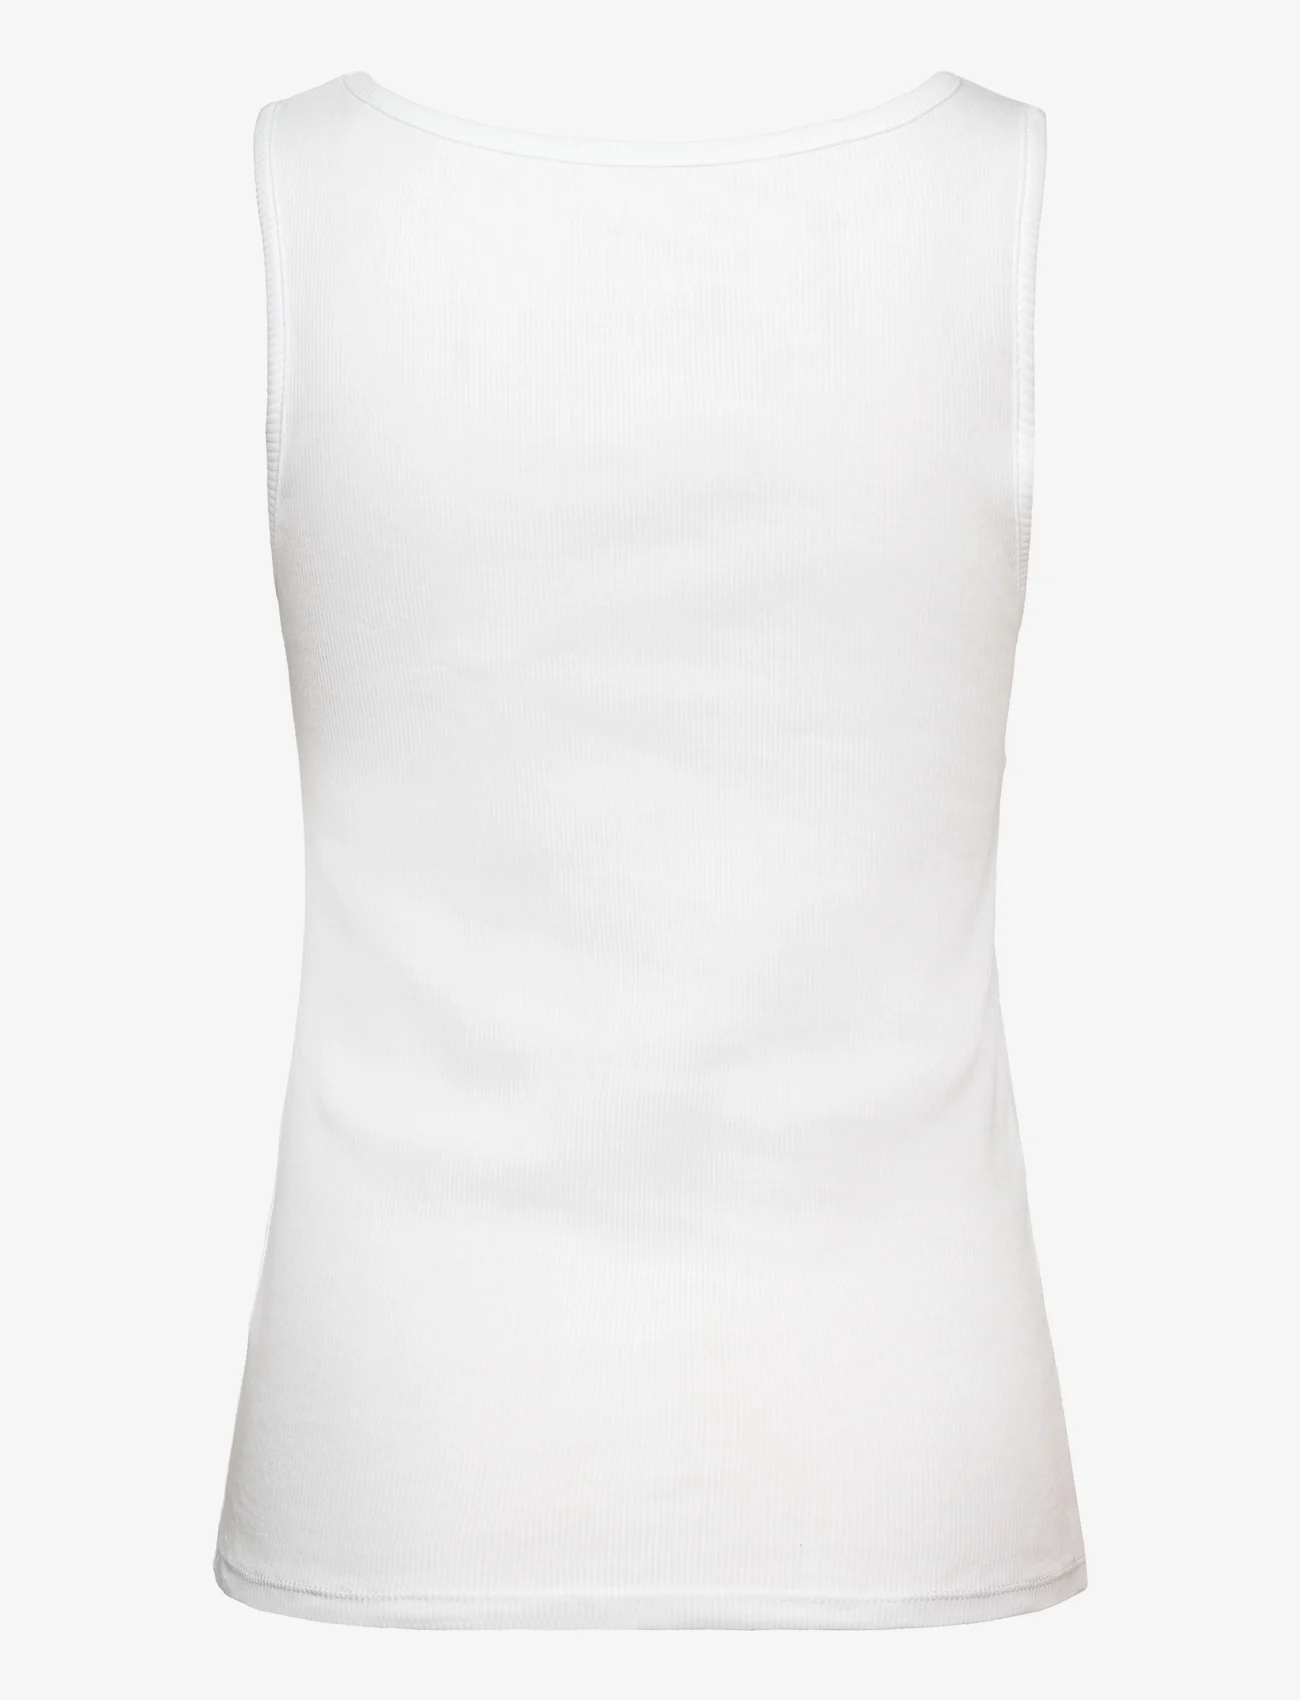 GUESS Jeans - LOGO TANK TOP - ermeløse topper - pure white - 1